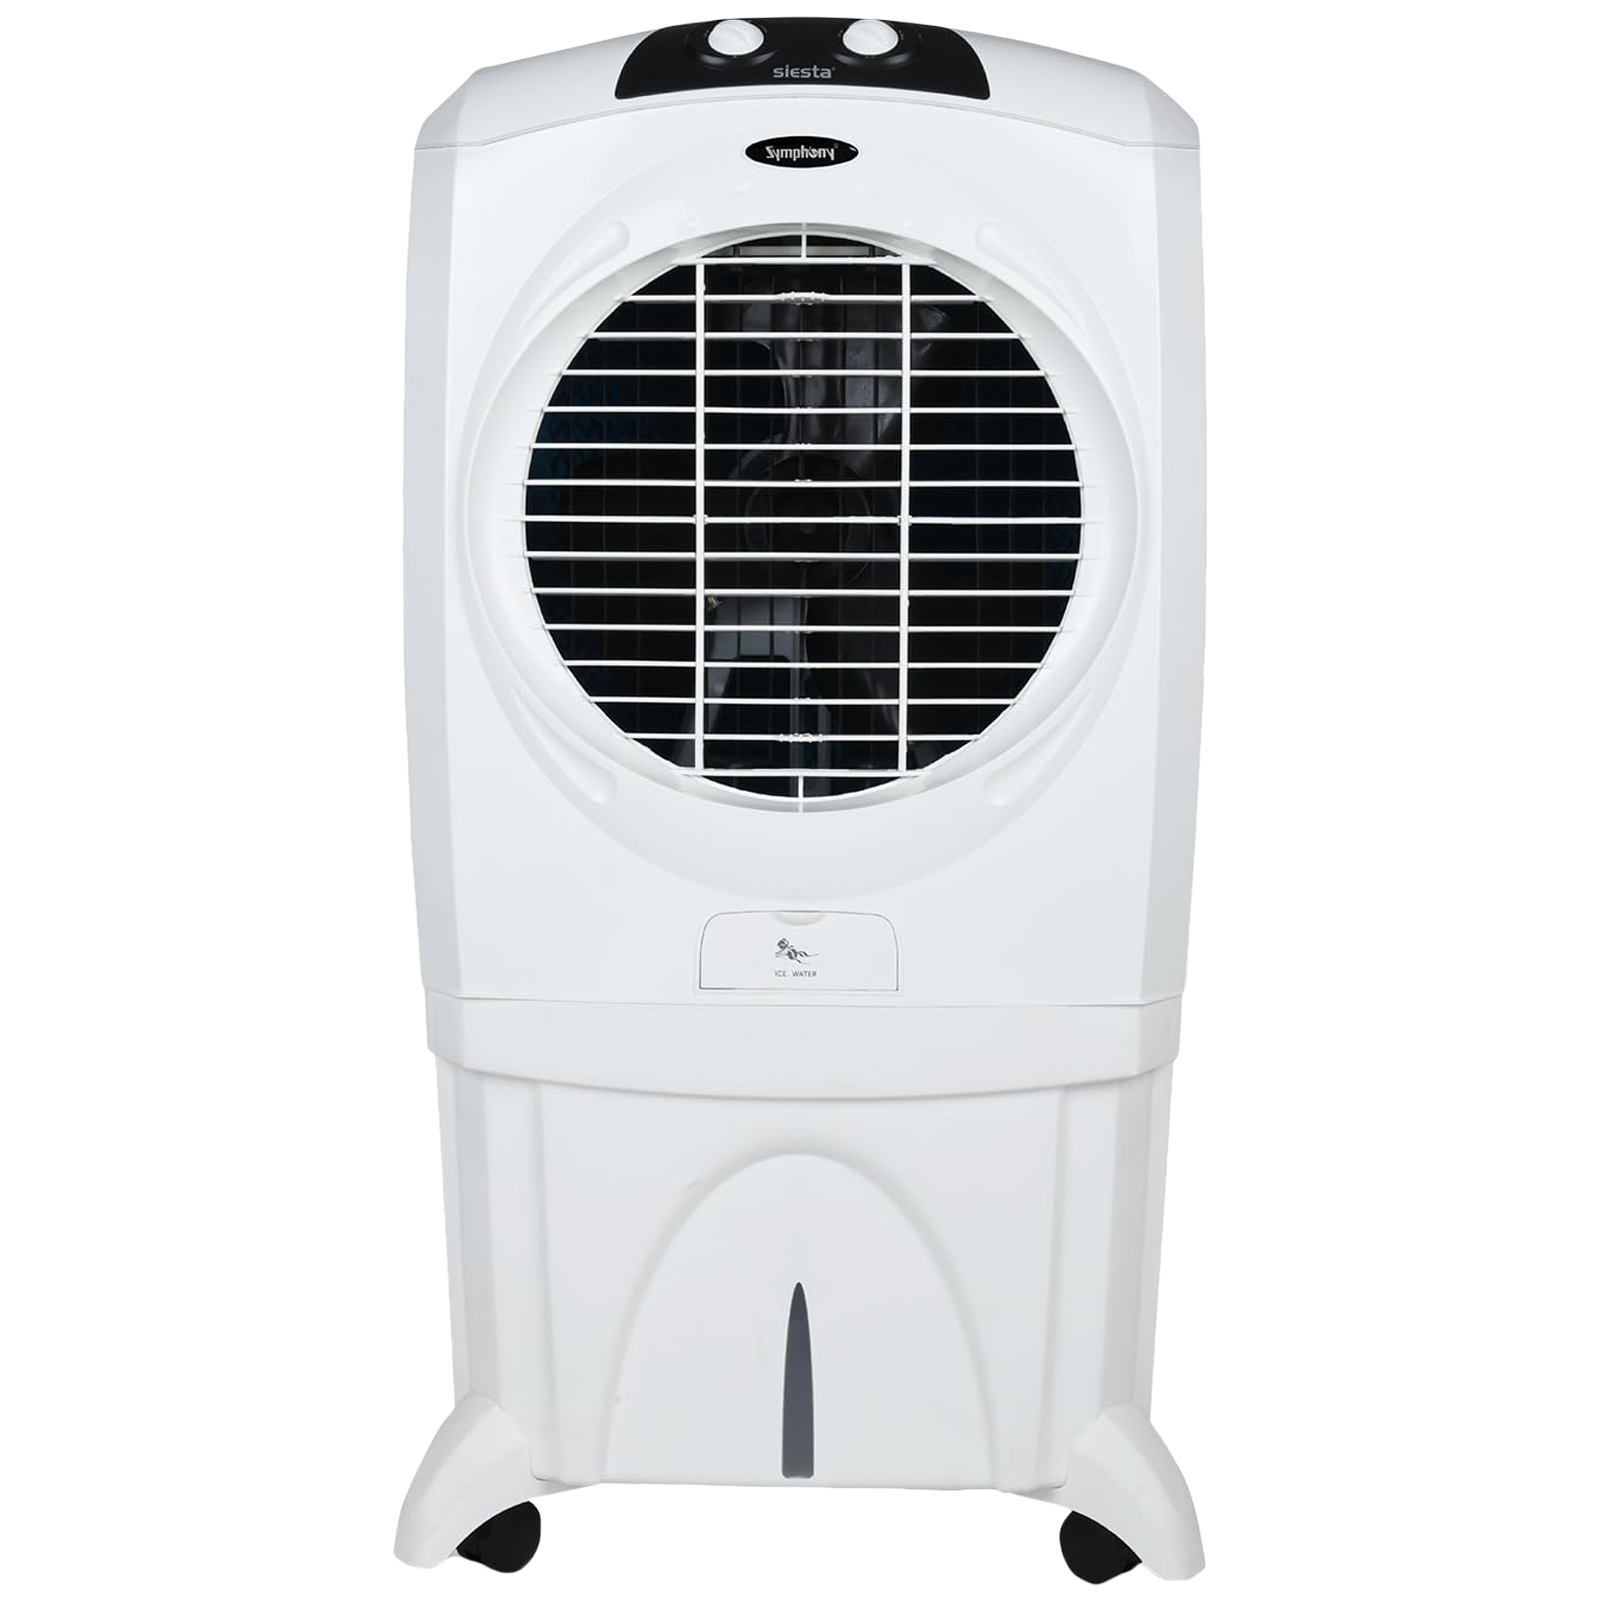 Symphony SIESTA 95 XL 95 Litres Desert Air Cooler with i-Pure Technology (Cool Flow Dispenser, White)